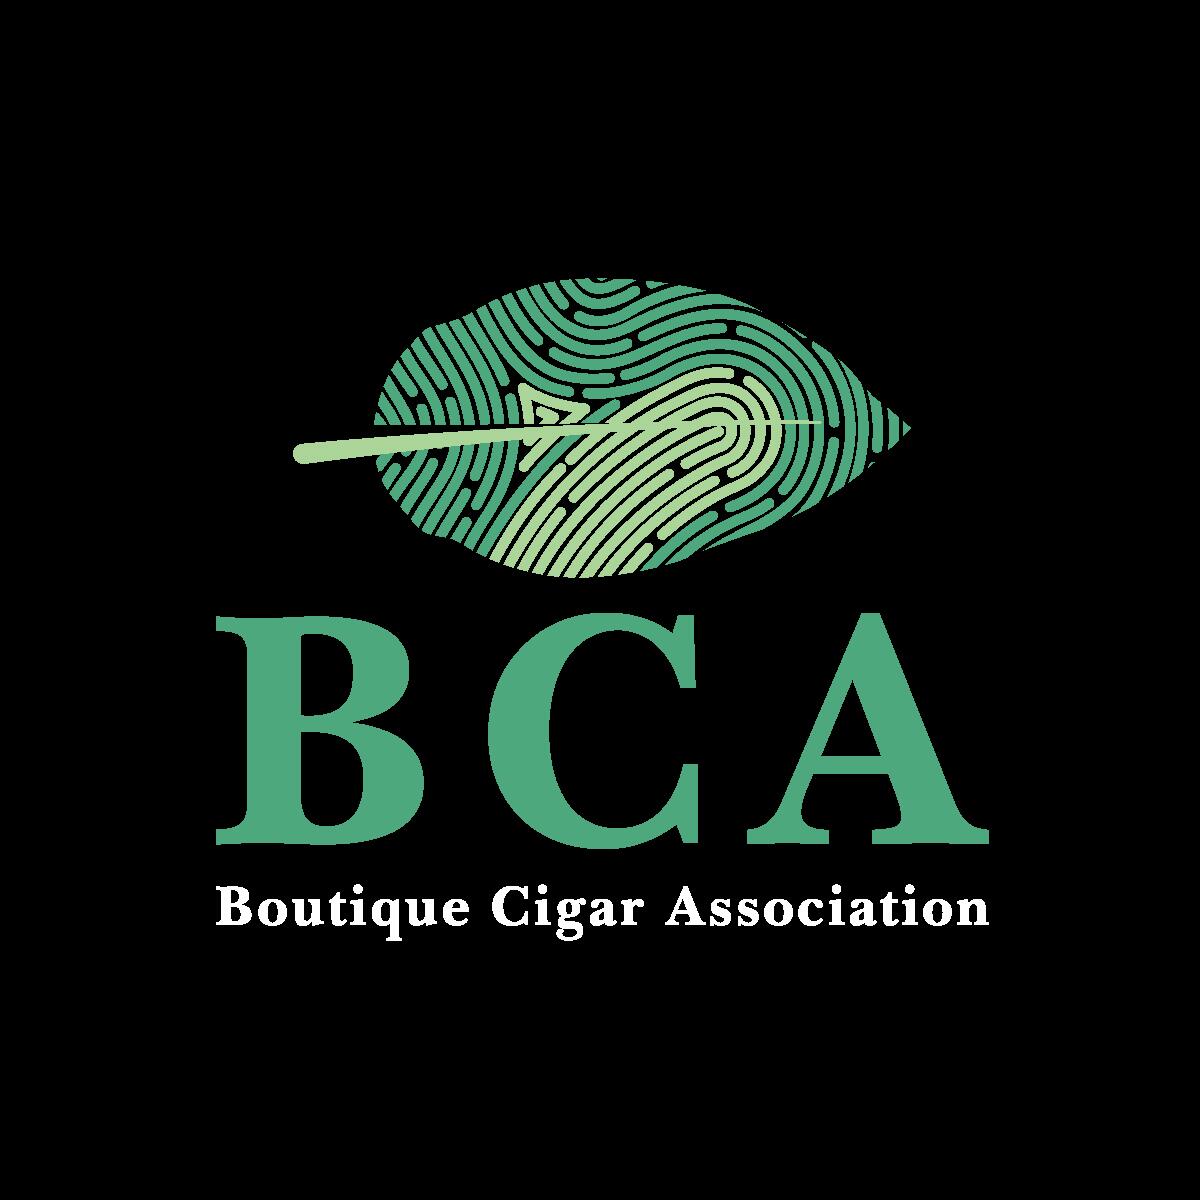 Rebellion Cigars are a member of the Boutique Cigar Association